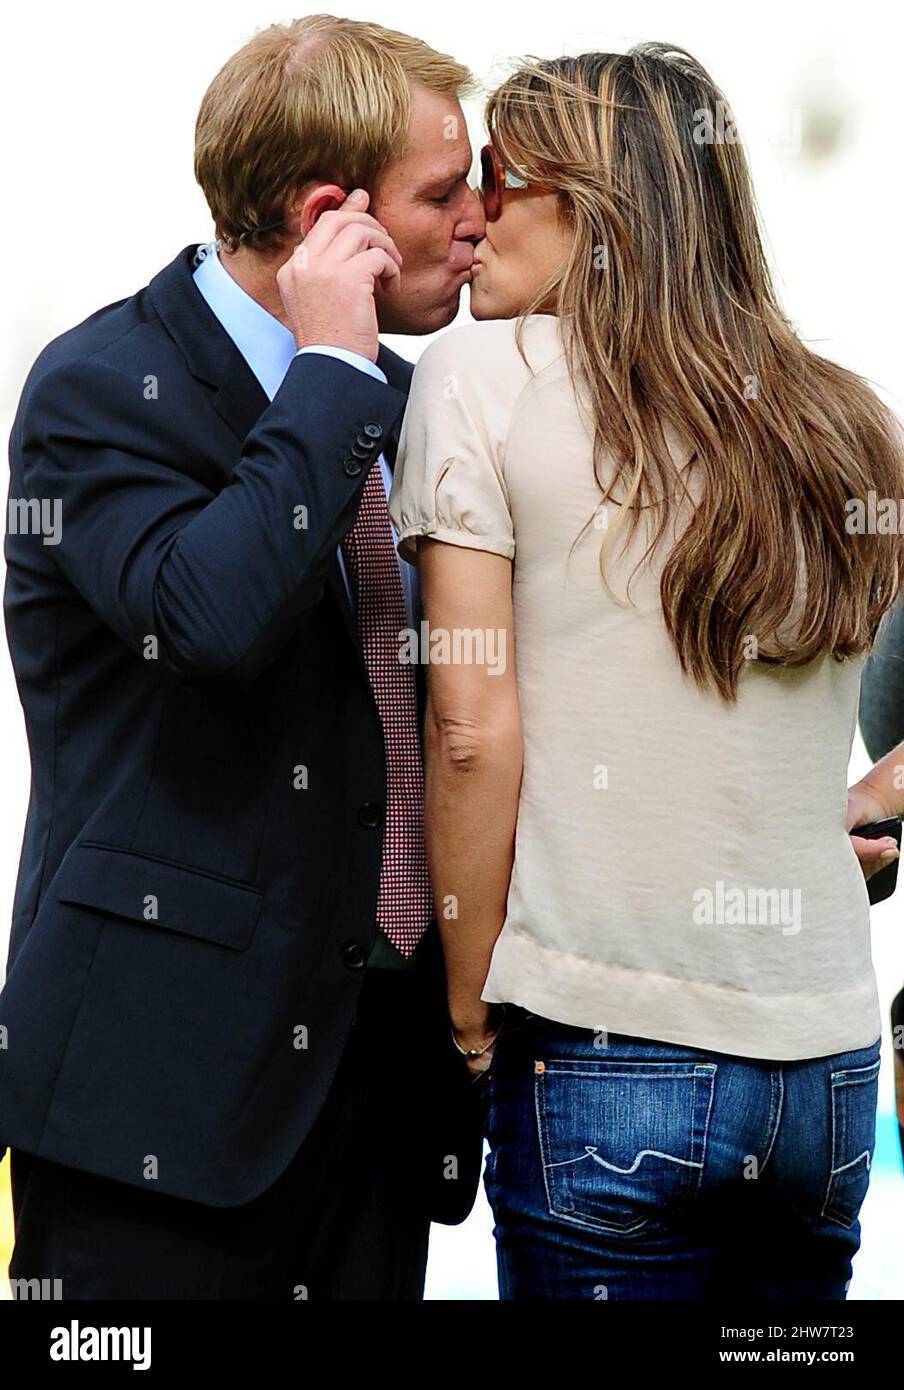 File photo dated 13-08-2011 of Shane Warne and Liz Hurley at kiss at Edgbaston, Birmingham. Former Australia cricketer Shane Warne has died at the age of 52, his management company MPC Entertainment has announced in a statement. Issue date: Friday March 4, 2022. Stock Photo